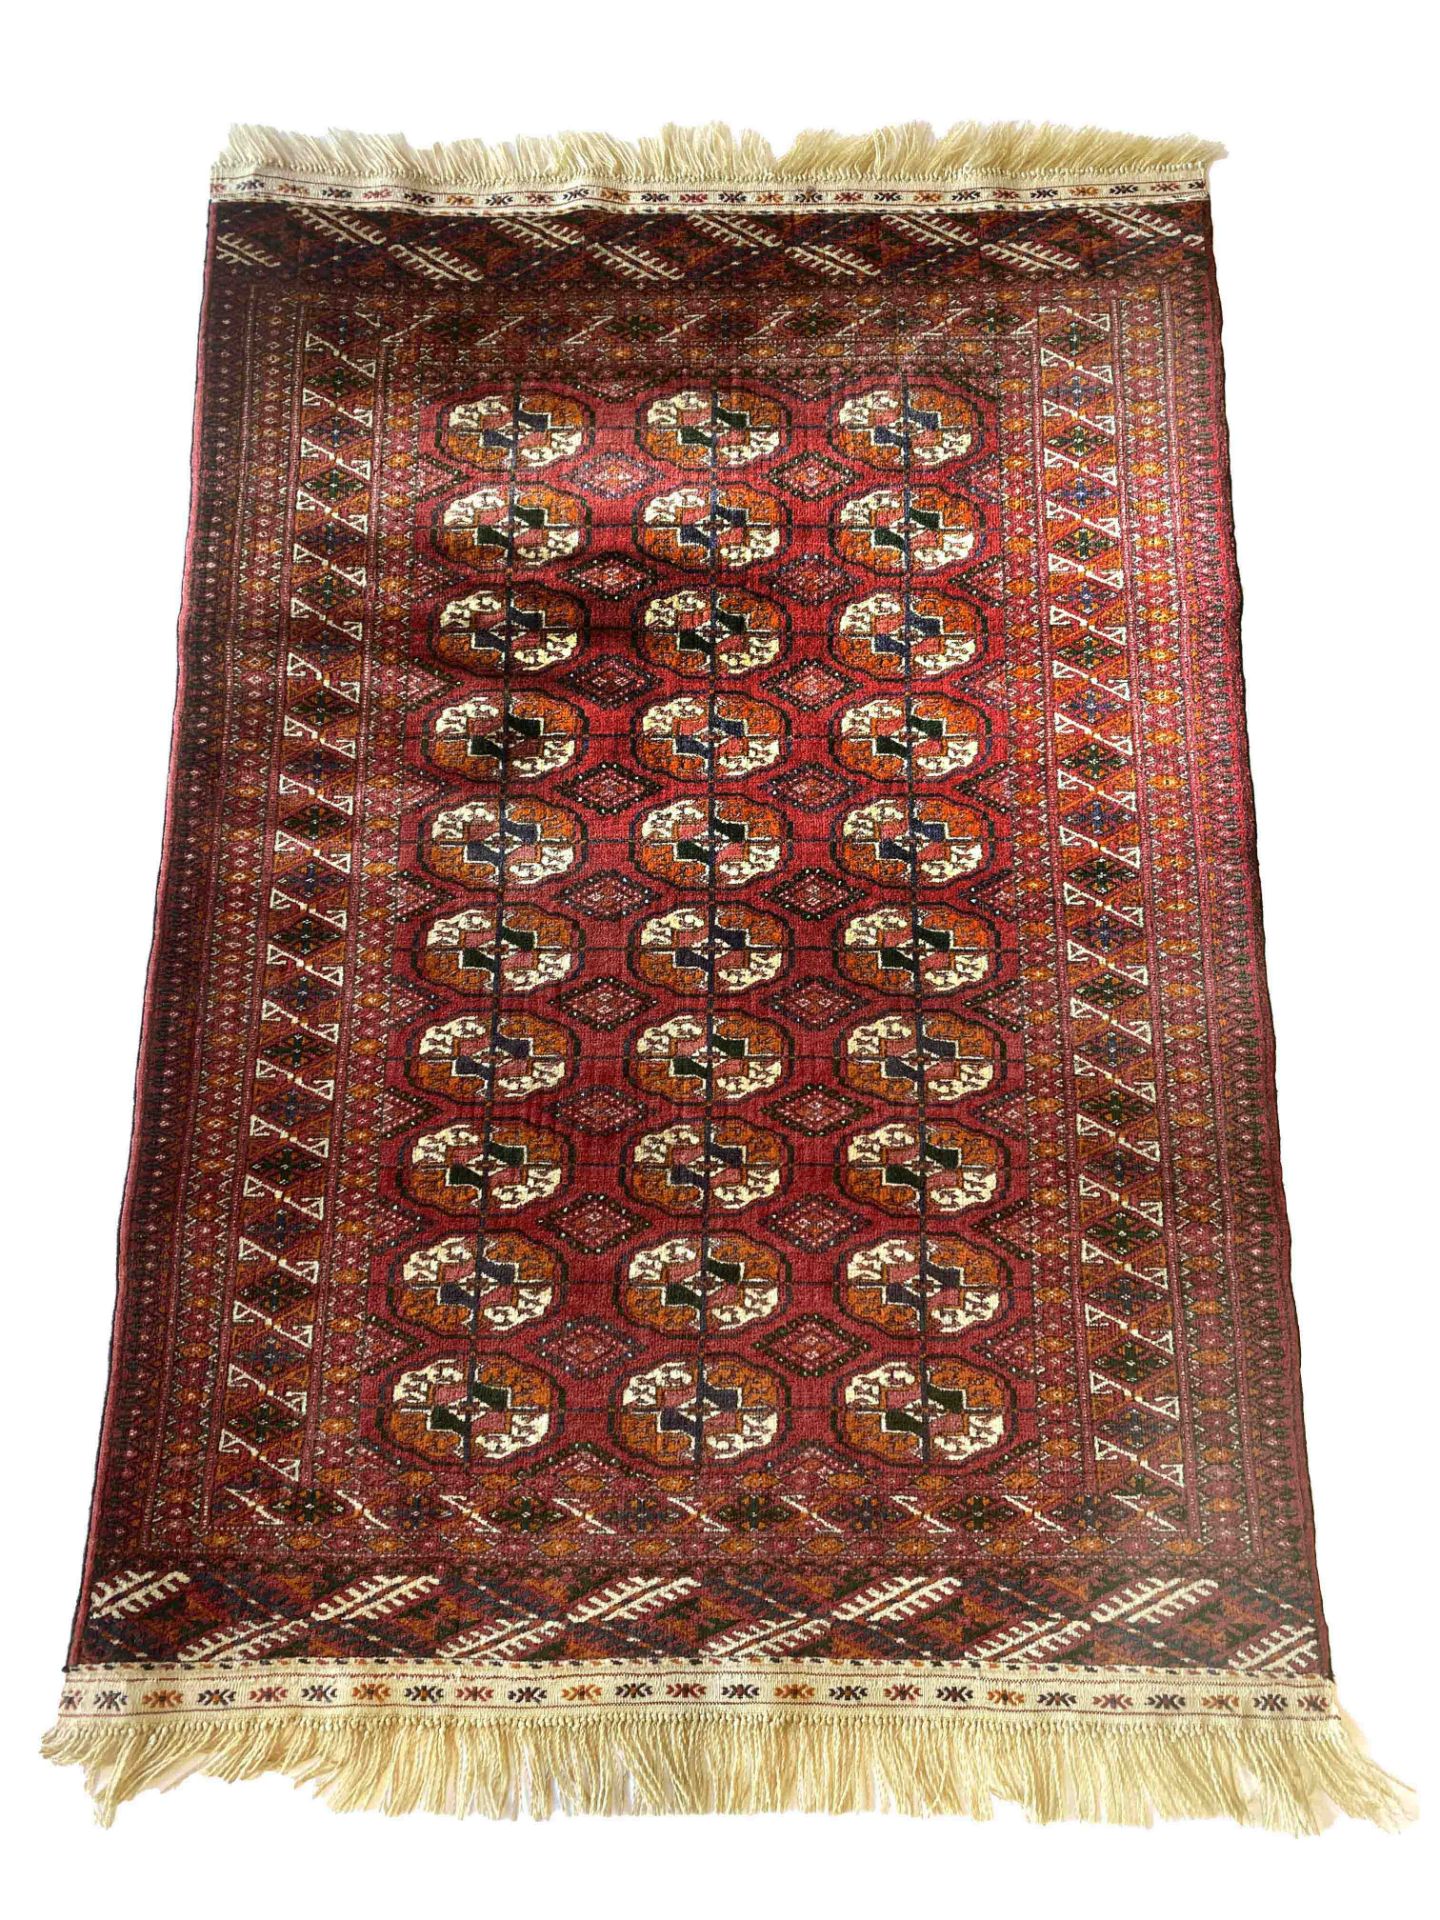 Carpet, Bukhara, good condition, 150 x 103 cm - The carpet can only be viewed and collected at